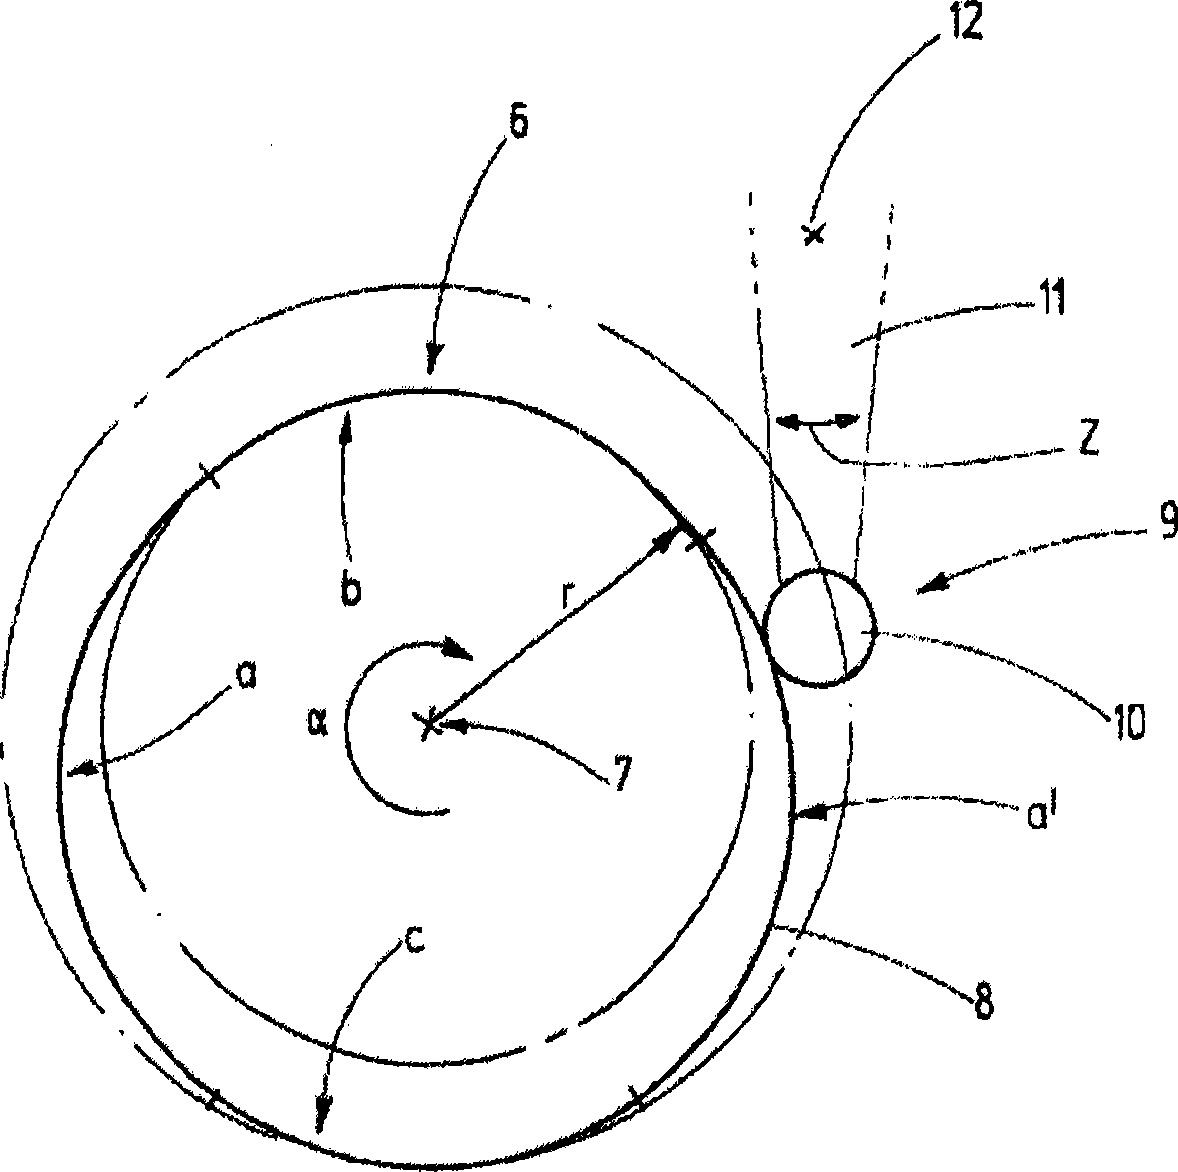 Cam disc for a shedding mechanism of a loom